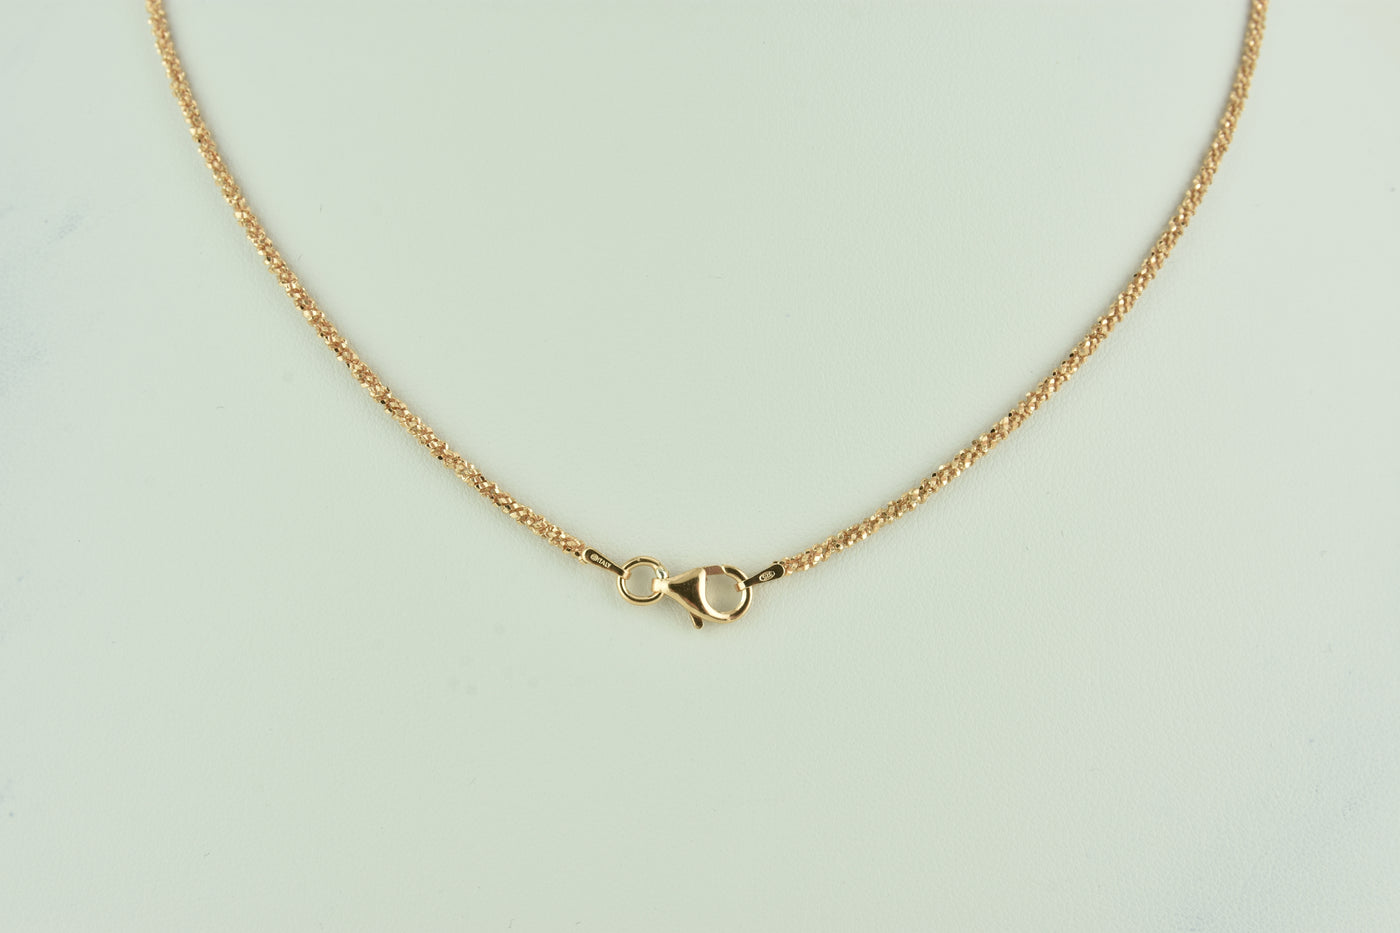 Diamond Cut Twisted Sterling Silver Chain with Rose Gold Plate